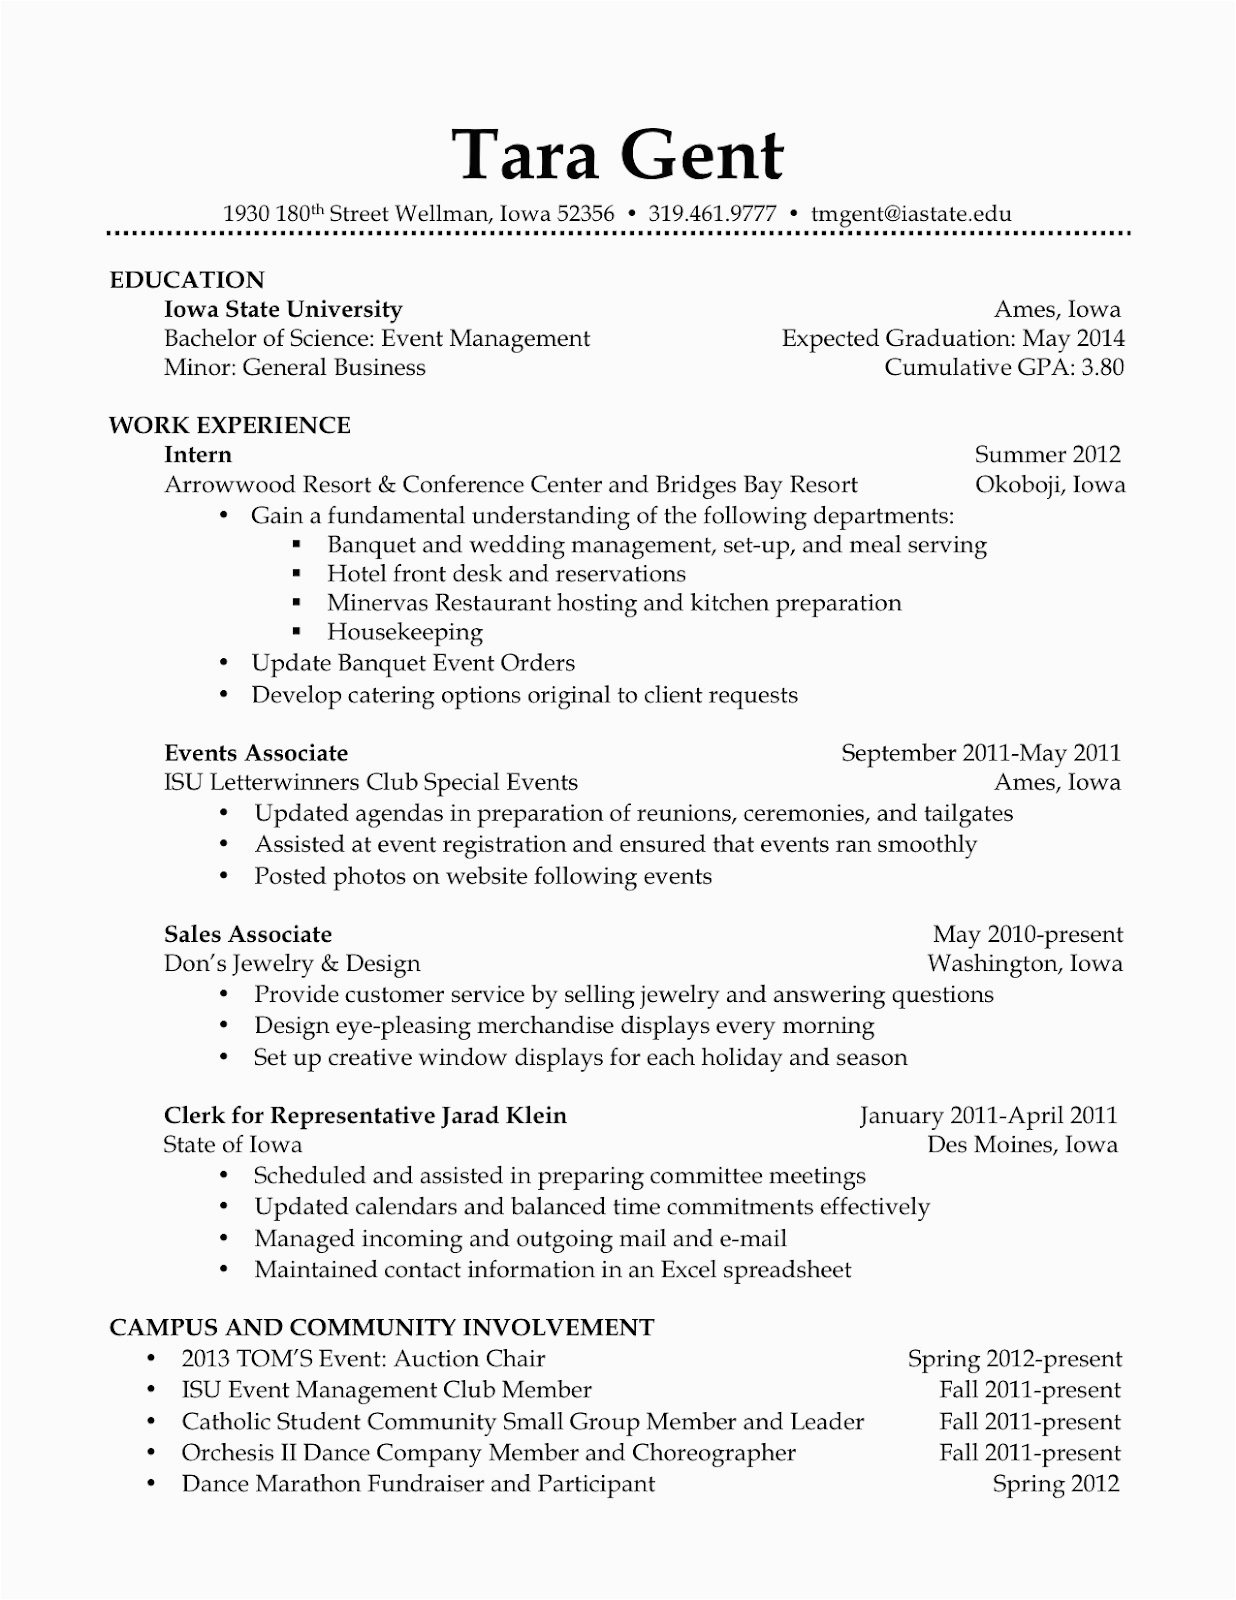 Sample Resume for Barista Position with No Experience 12 13 Cover Letter Barista No Experience